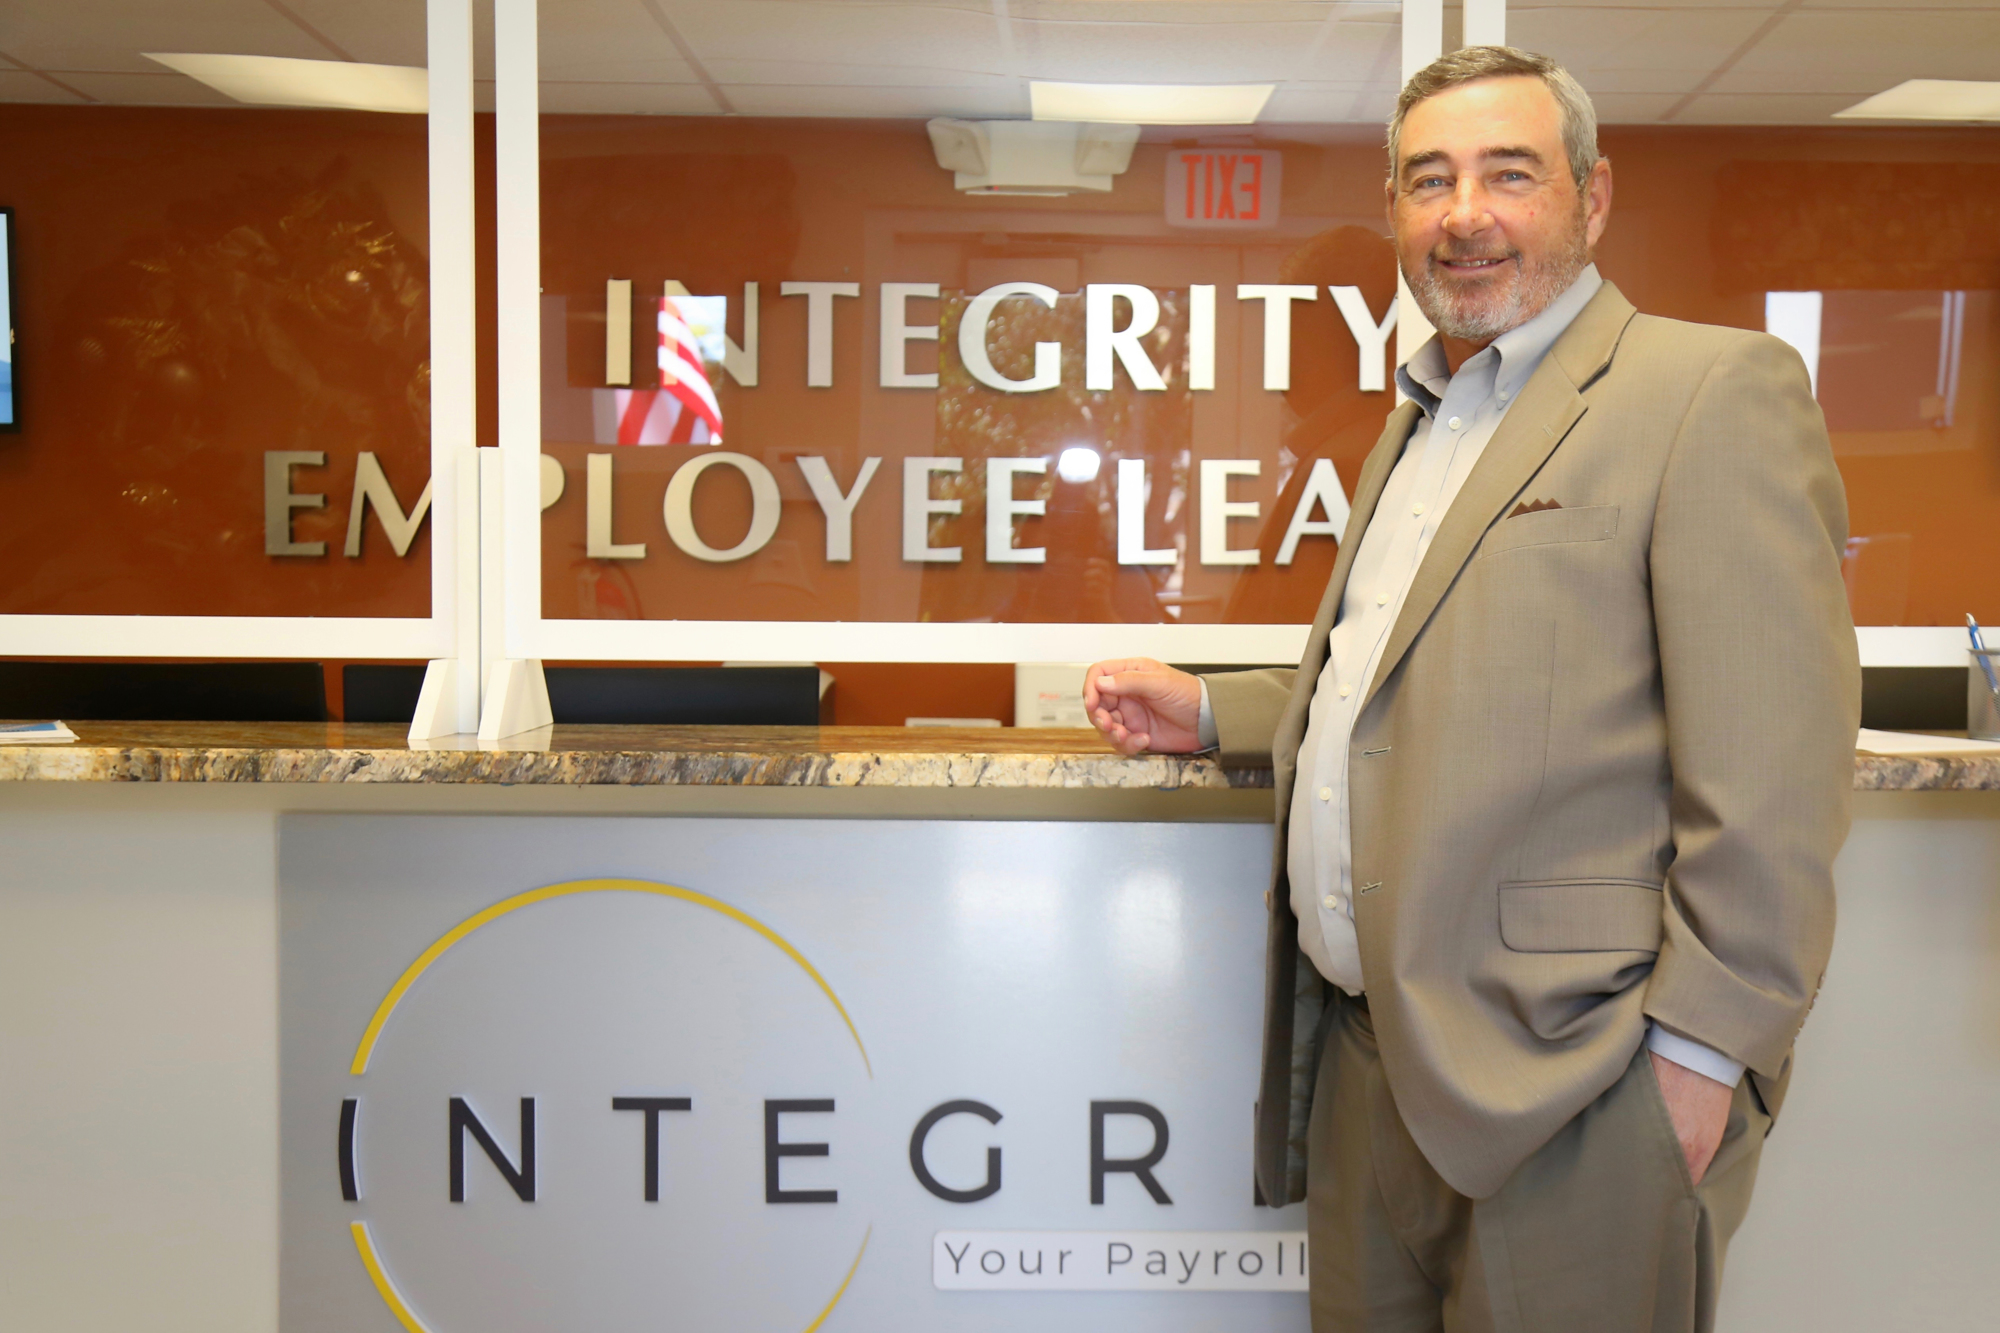 Stefania Pifferi. Tom Natoli founded Punta Gorda-based Integrity Employee Leasing in 2004. The company has since grown to manage $250 million in payroll among clients.